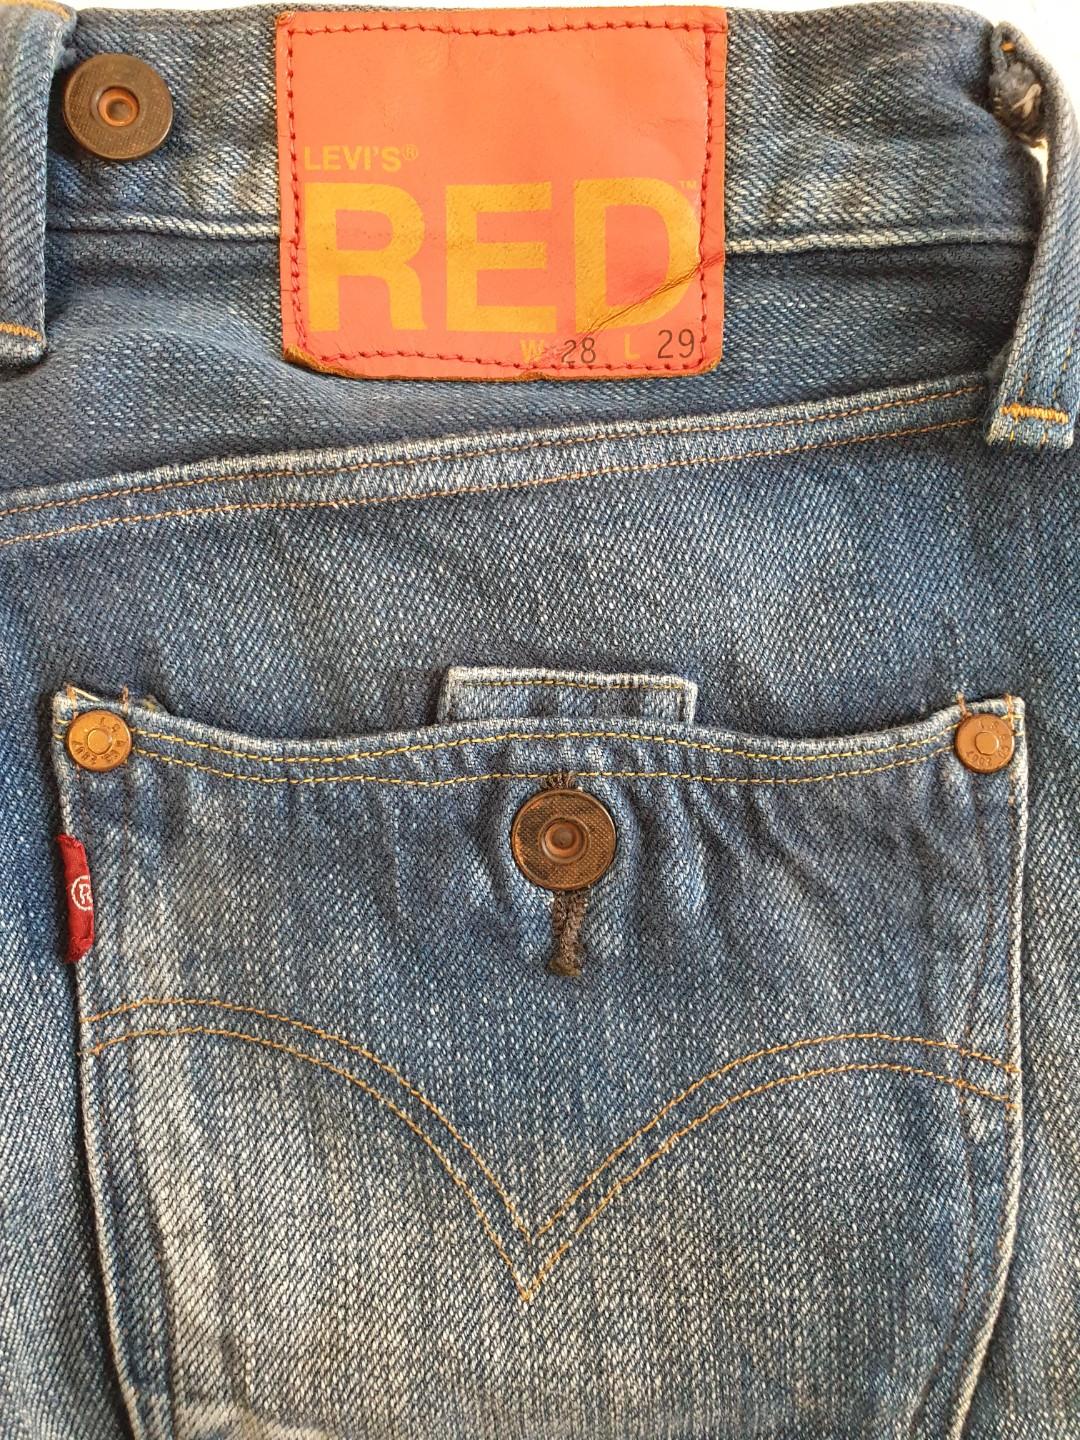 Levis RED Made in Japan Jeans size 28, Men's Fashion, Bottoms, Jeans on  Carousell